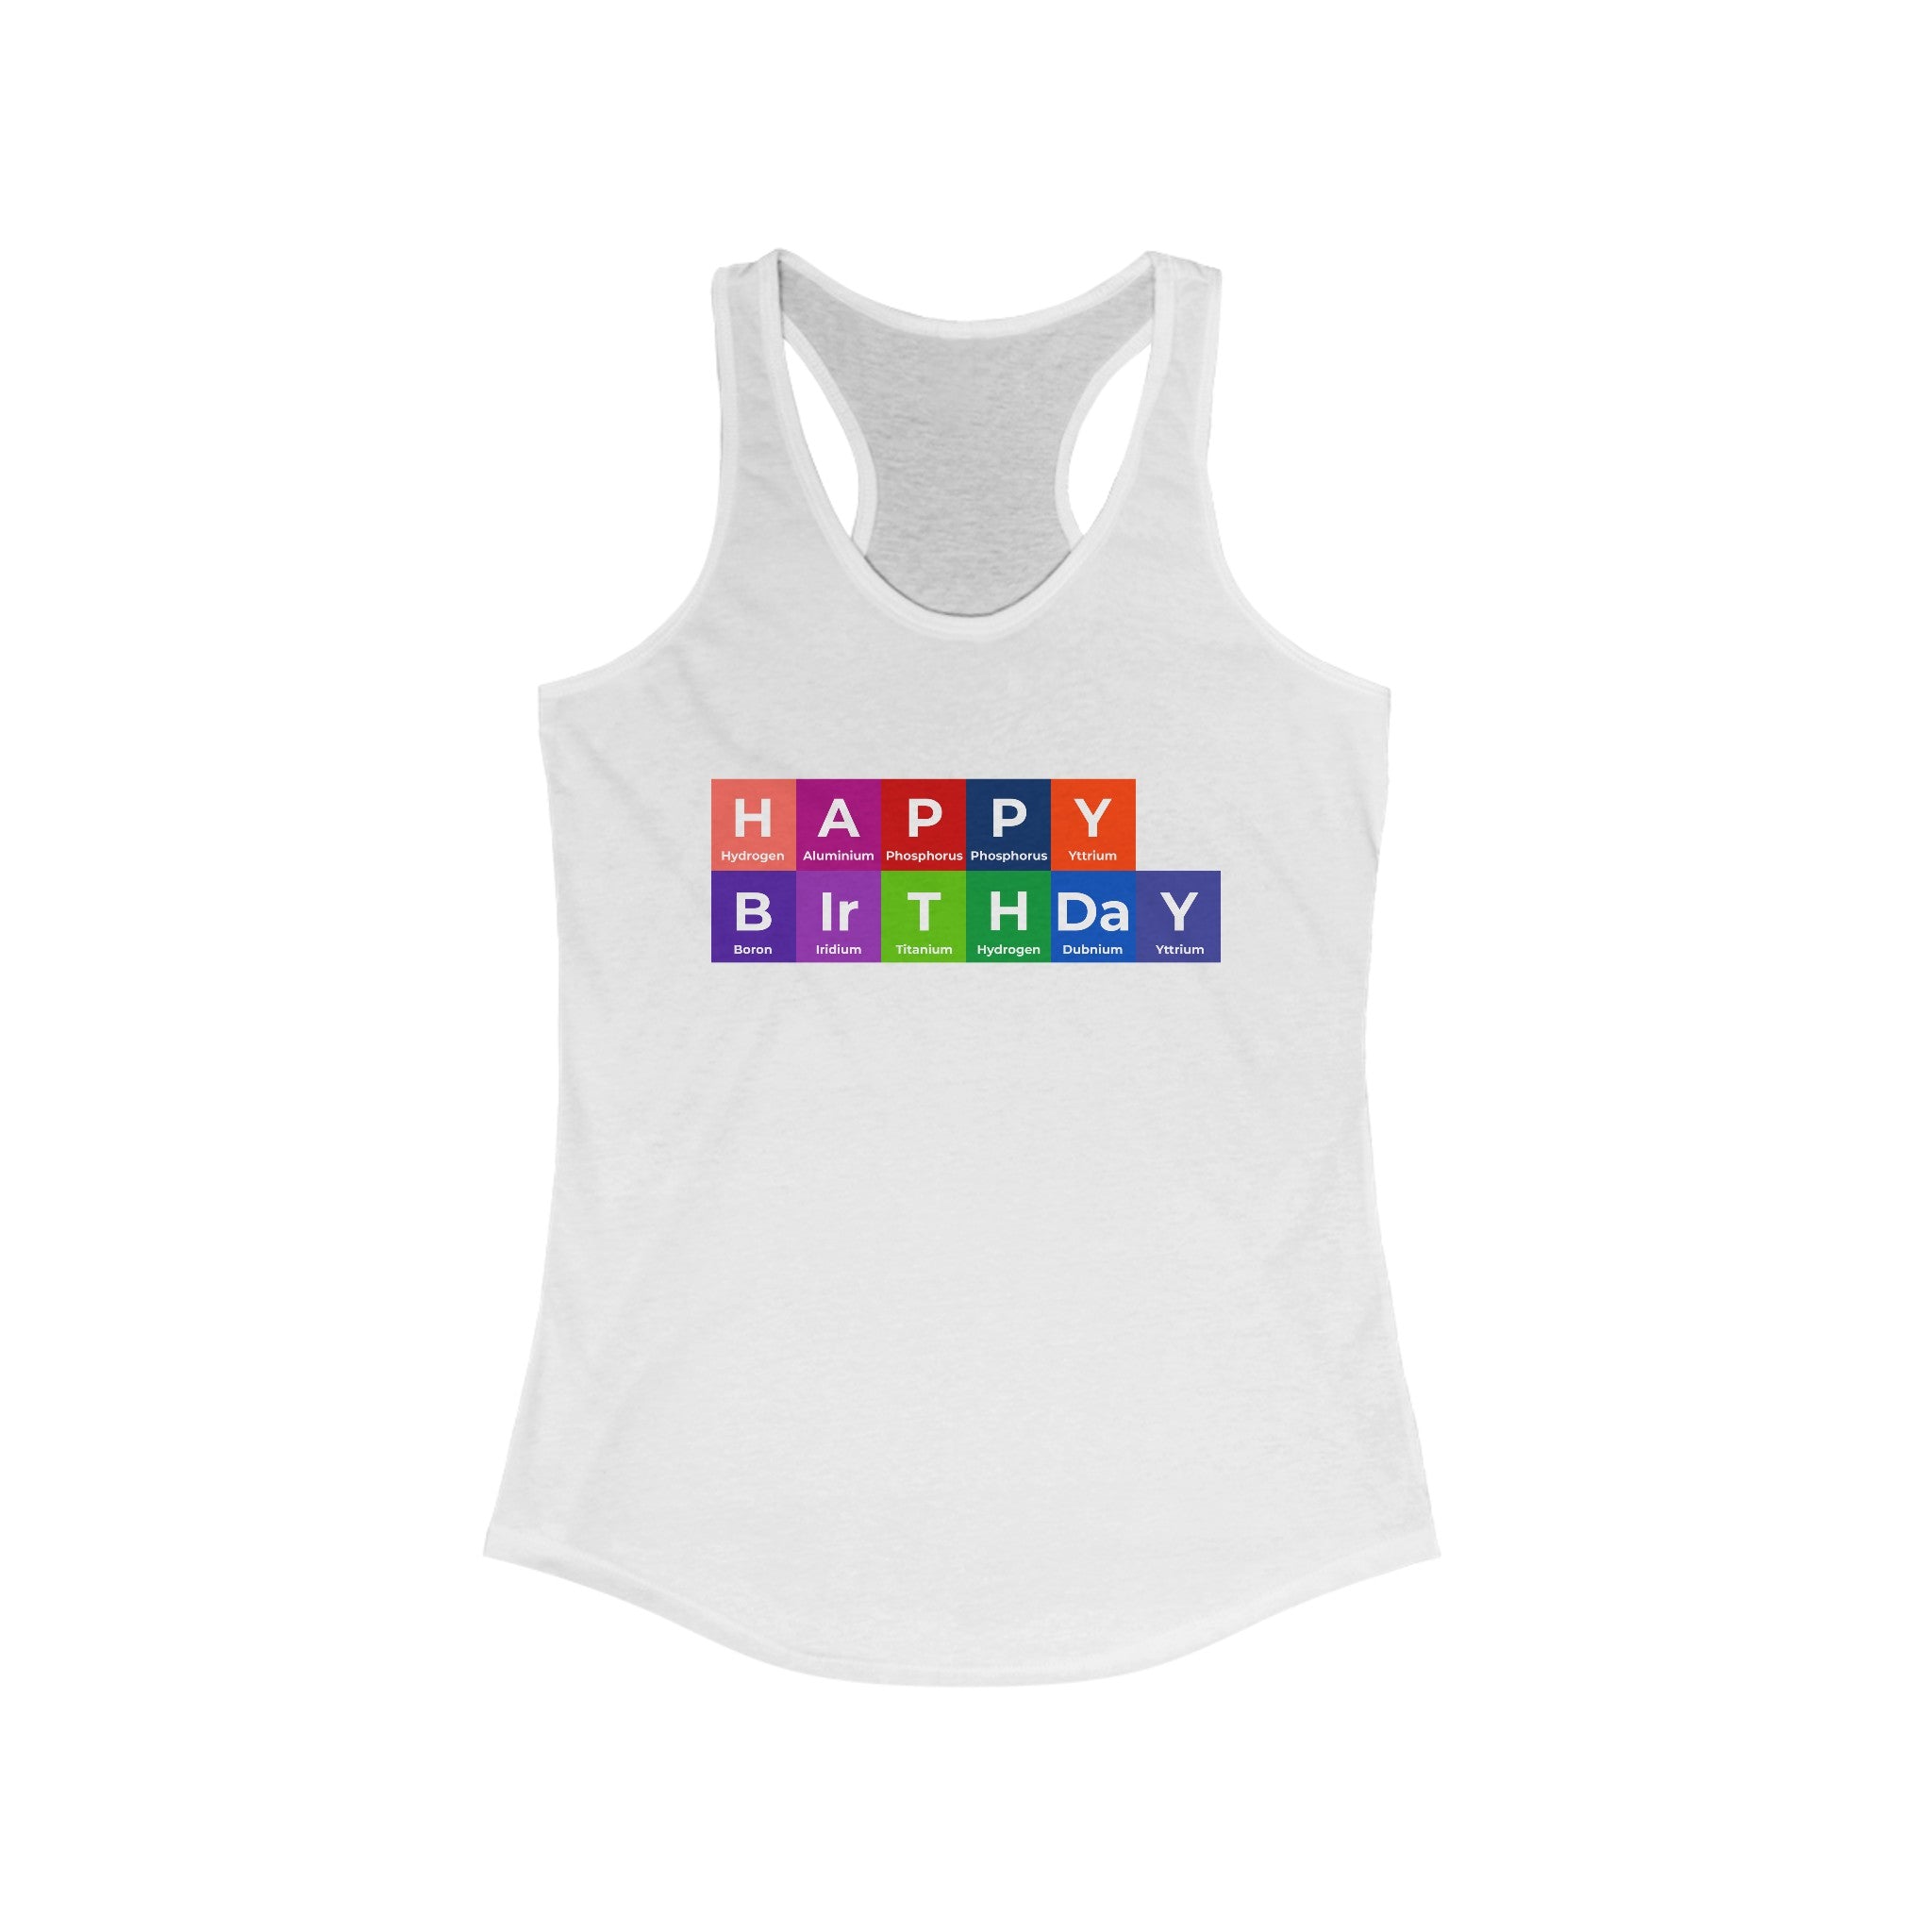 Stylish and lightweight Happy Birthday - Women's Racerback Tank featuring "HAPPY BIRTHDAY" text designed using colorful periodic table elements.